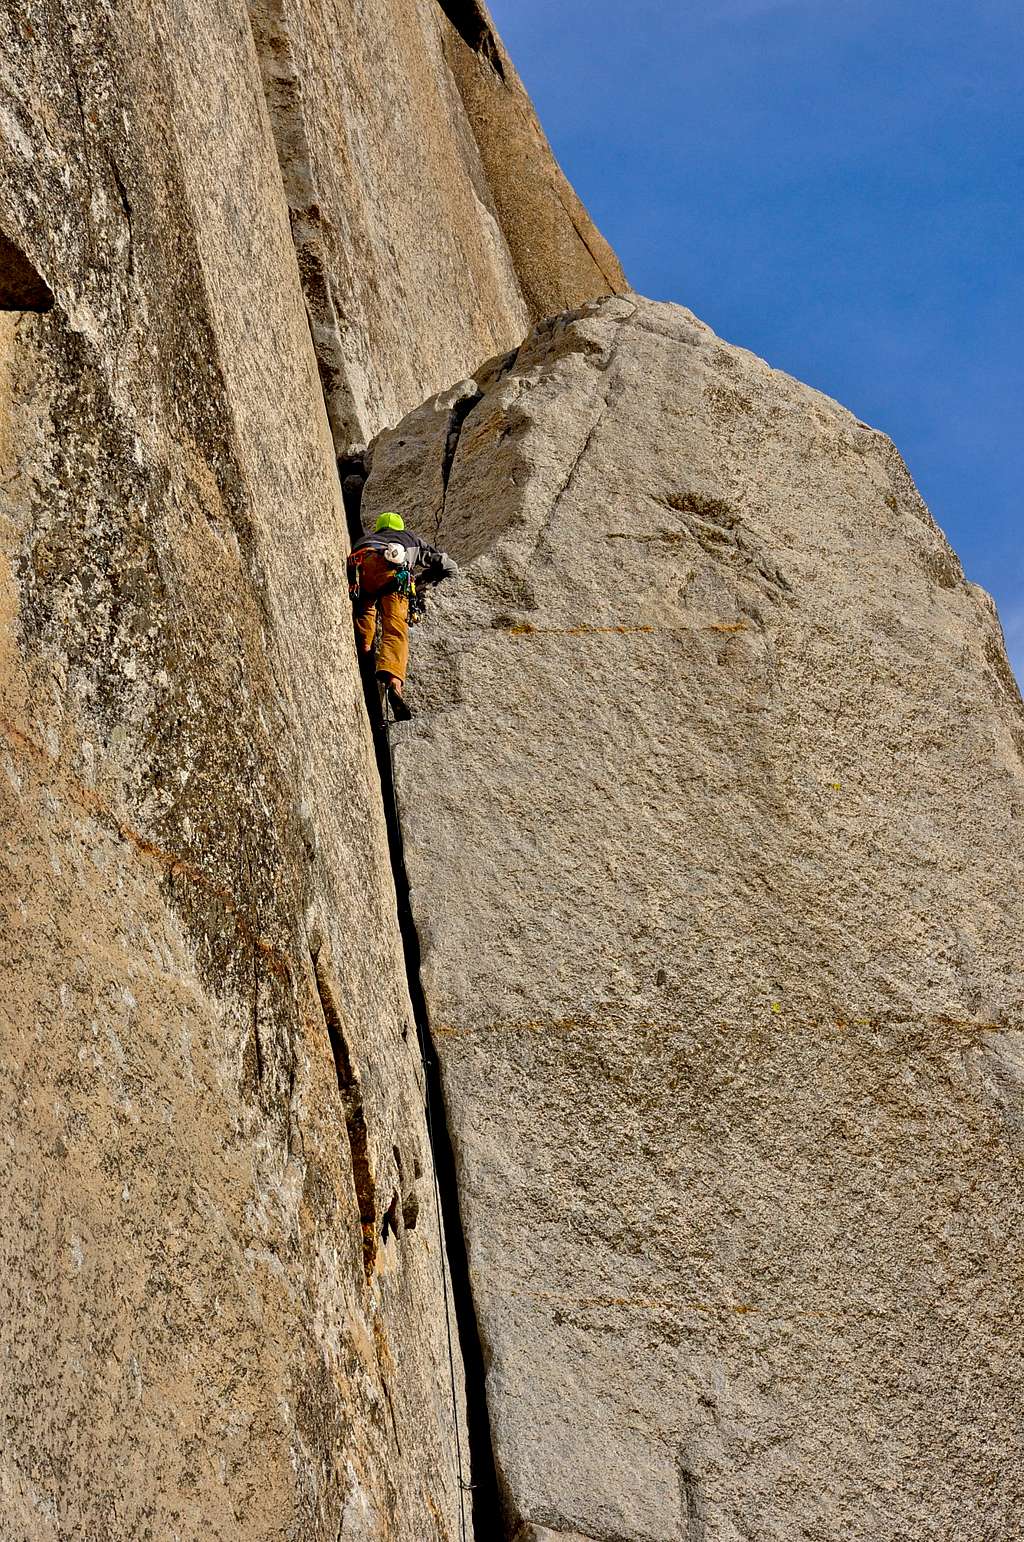 Finishing the crux section